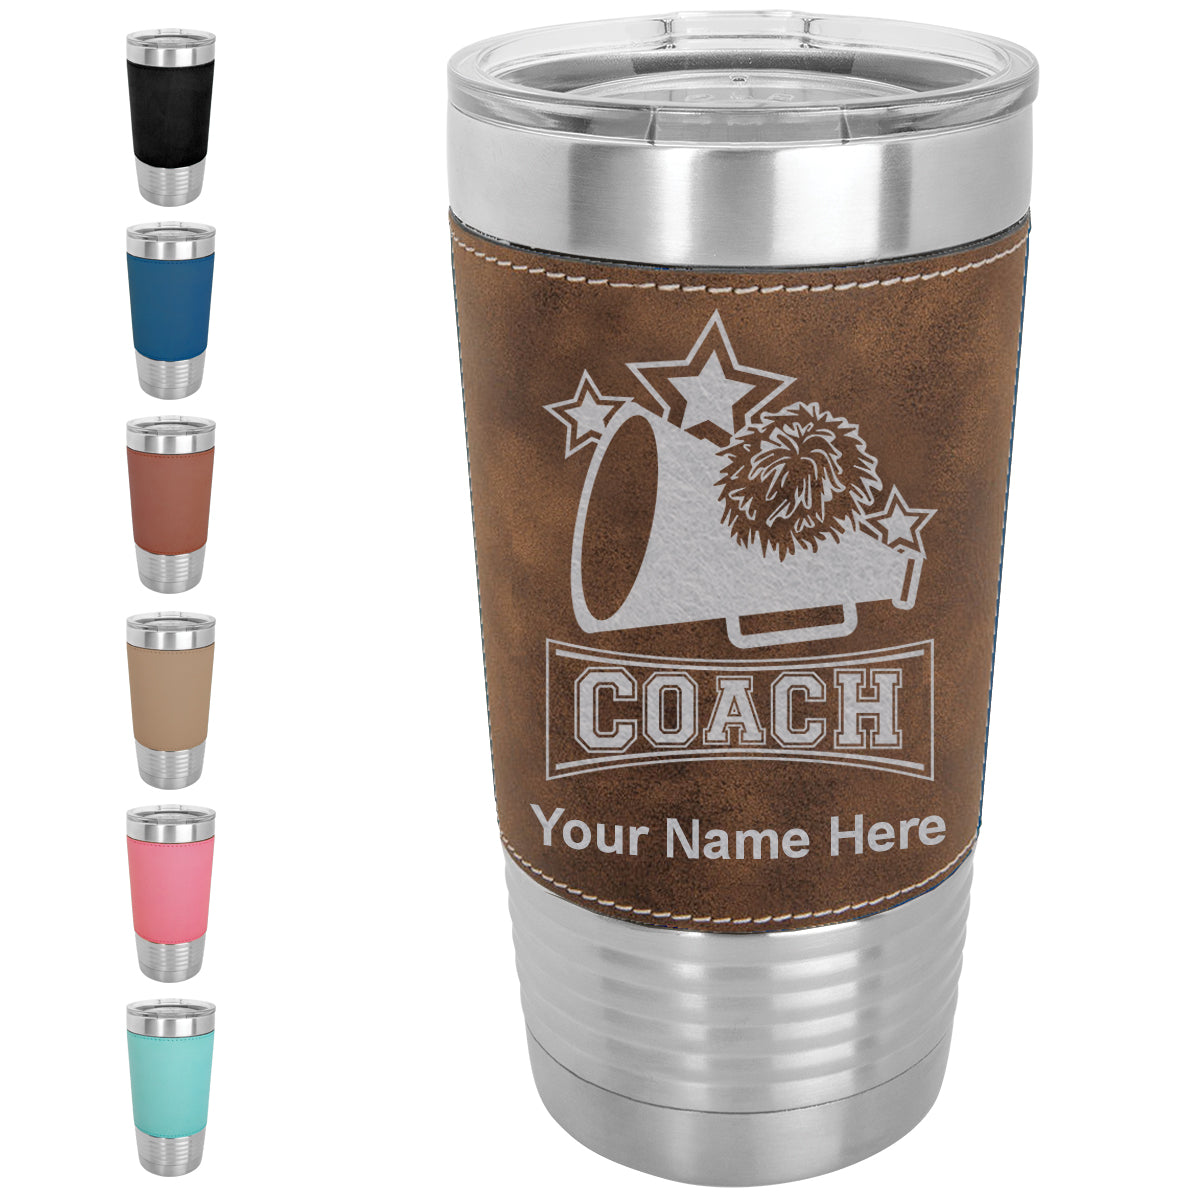 20oz Faux Leather Tumbler Mug, Cheerleading Coach, Personalized Engraving Included - LaserGram Custom Engraved Gifts